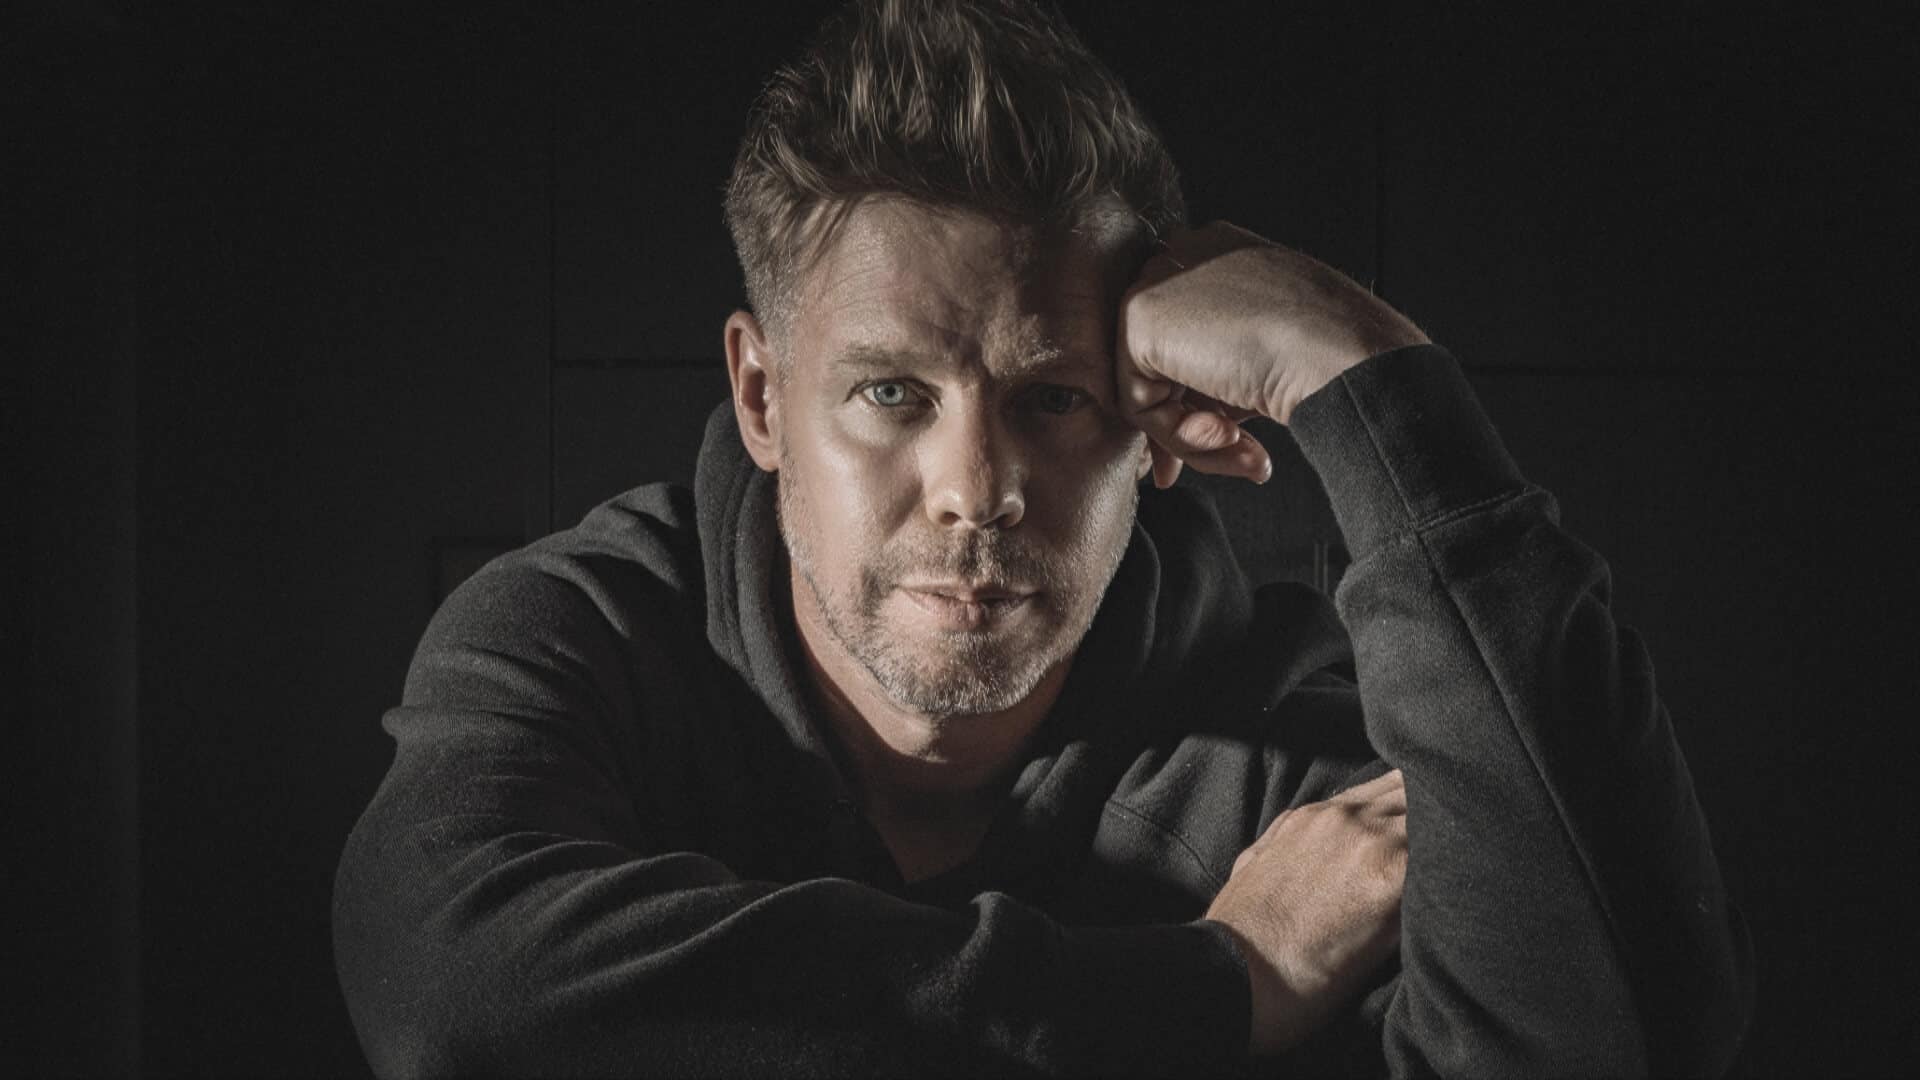 Ferry Corsten goes breakbeat on mesmerizing new single 'High On You' feat. Maria Marcus: Listen